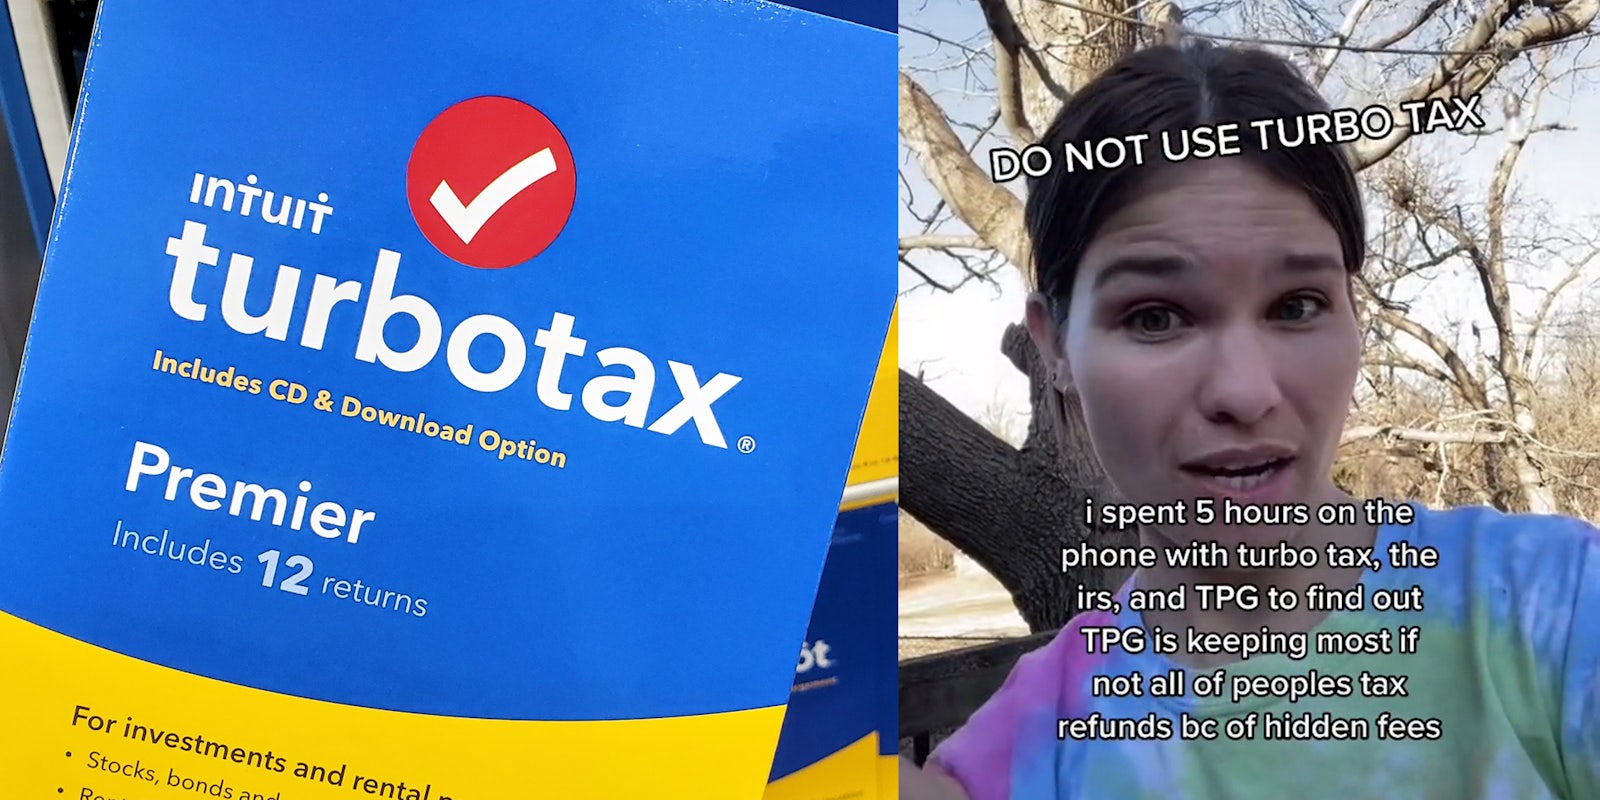 turbotax software (l) woman with caption 'do not use turbotax, i spent 5 hours on the phone with turbo tax, the irs, and TPG to find out TPG is keeping most if not all of peoples tax refunds bc of hidden fees' (r)